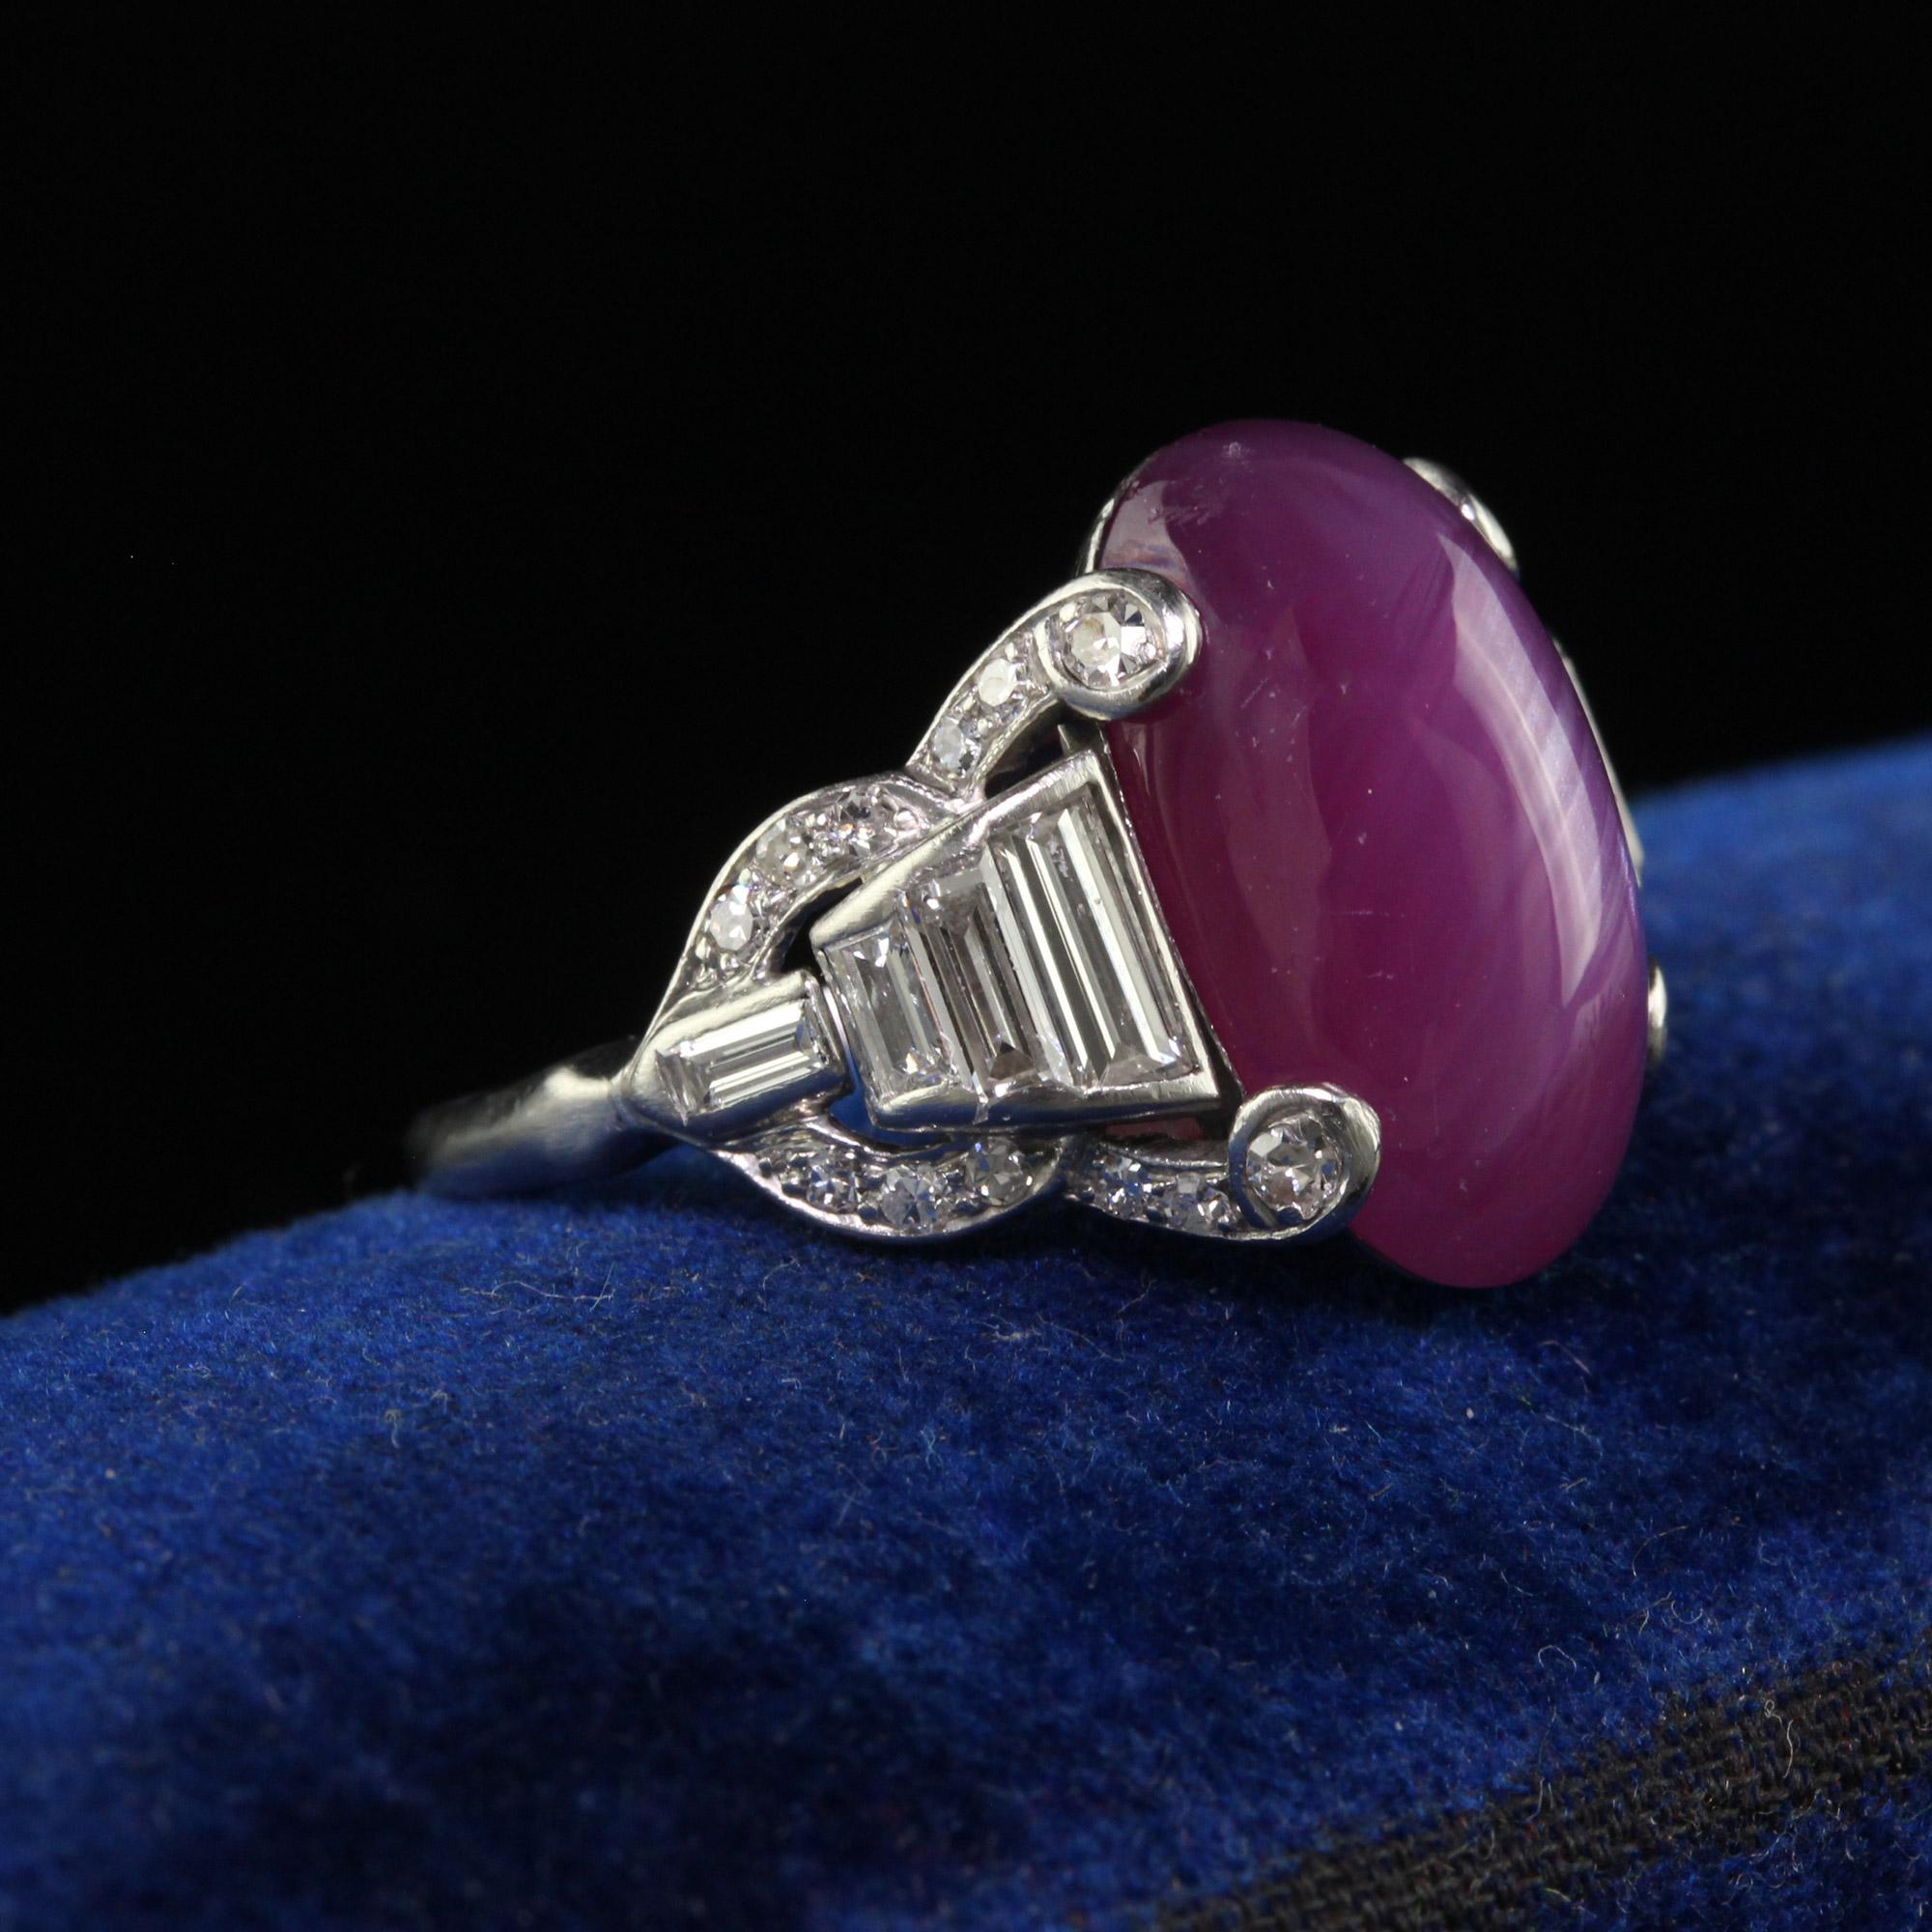 Antique Art Deco Platinum Burma Star Ruby and Diamond Cocktail Ring - AGL In Good Condition For Sale In Great Neck, NY